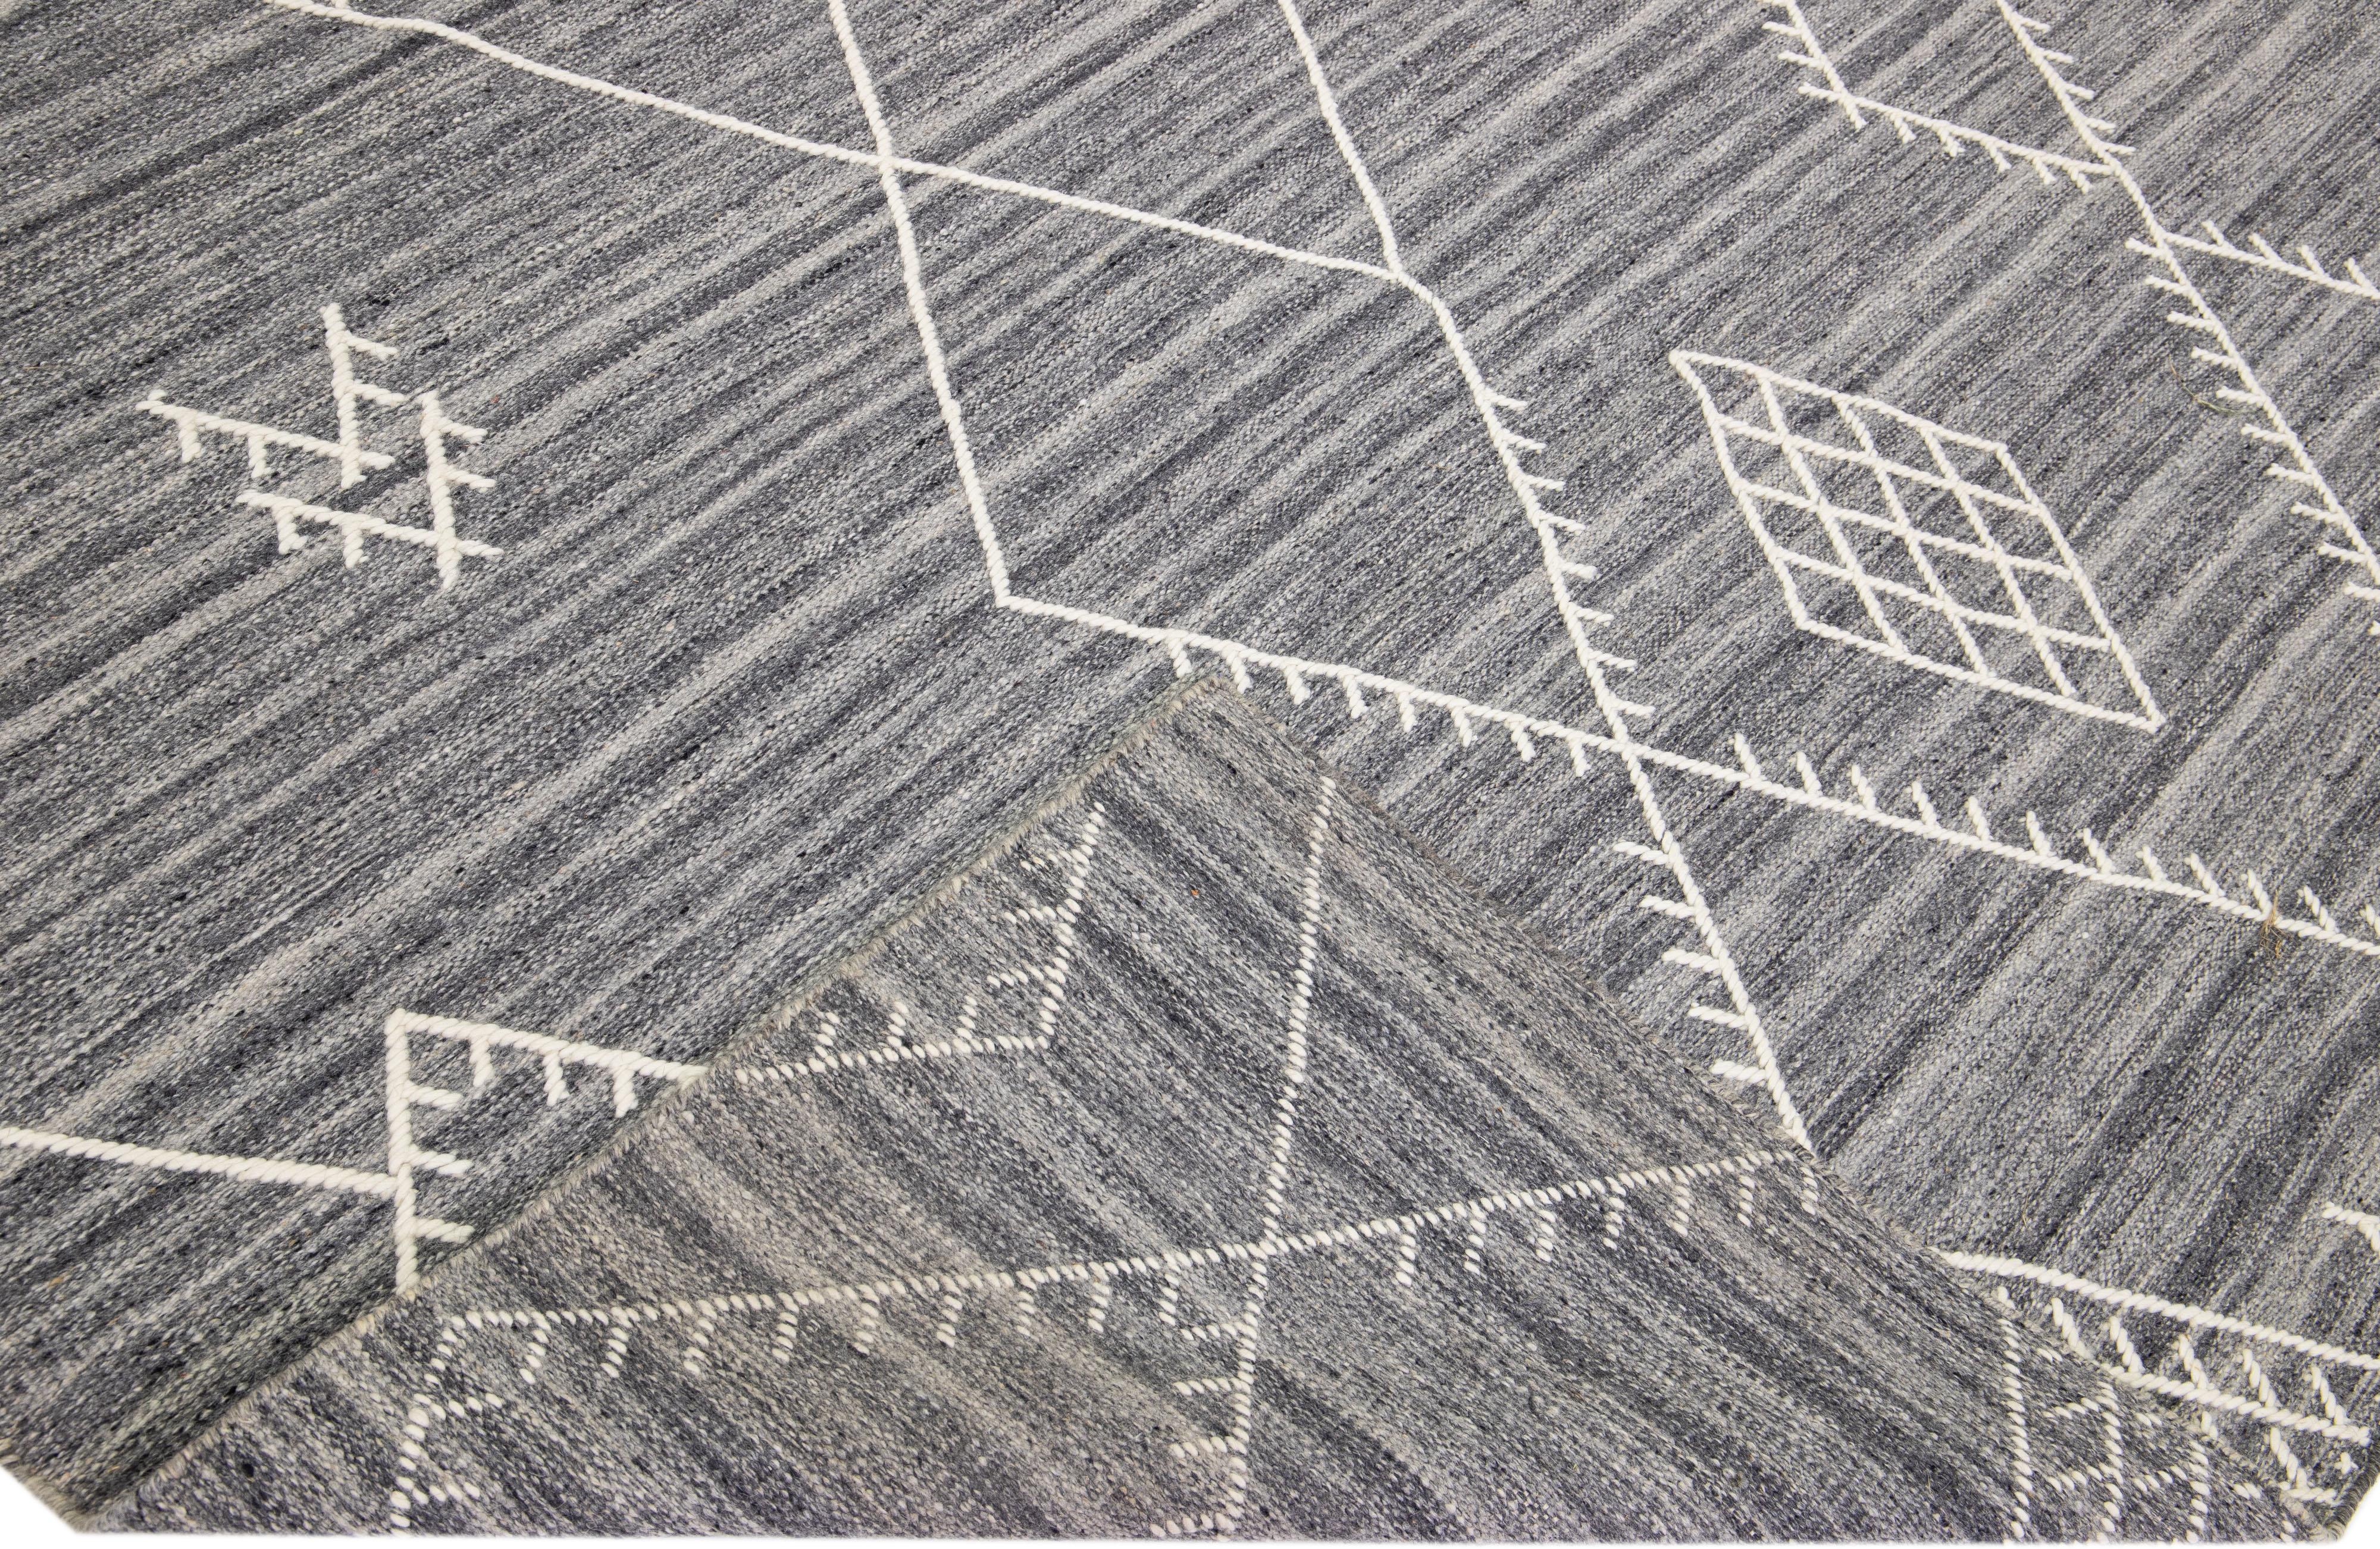 Beautiful kilim handmade wool rug with a gray field. This custom modern flatweave rug of our Nantucket collection has white accents and a gorgeous, all-over geometric coastal design.

This rug measures: 10'2